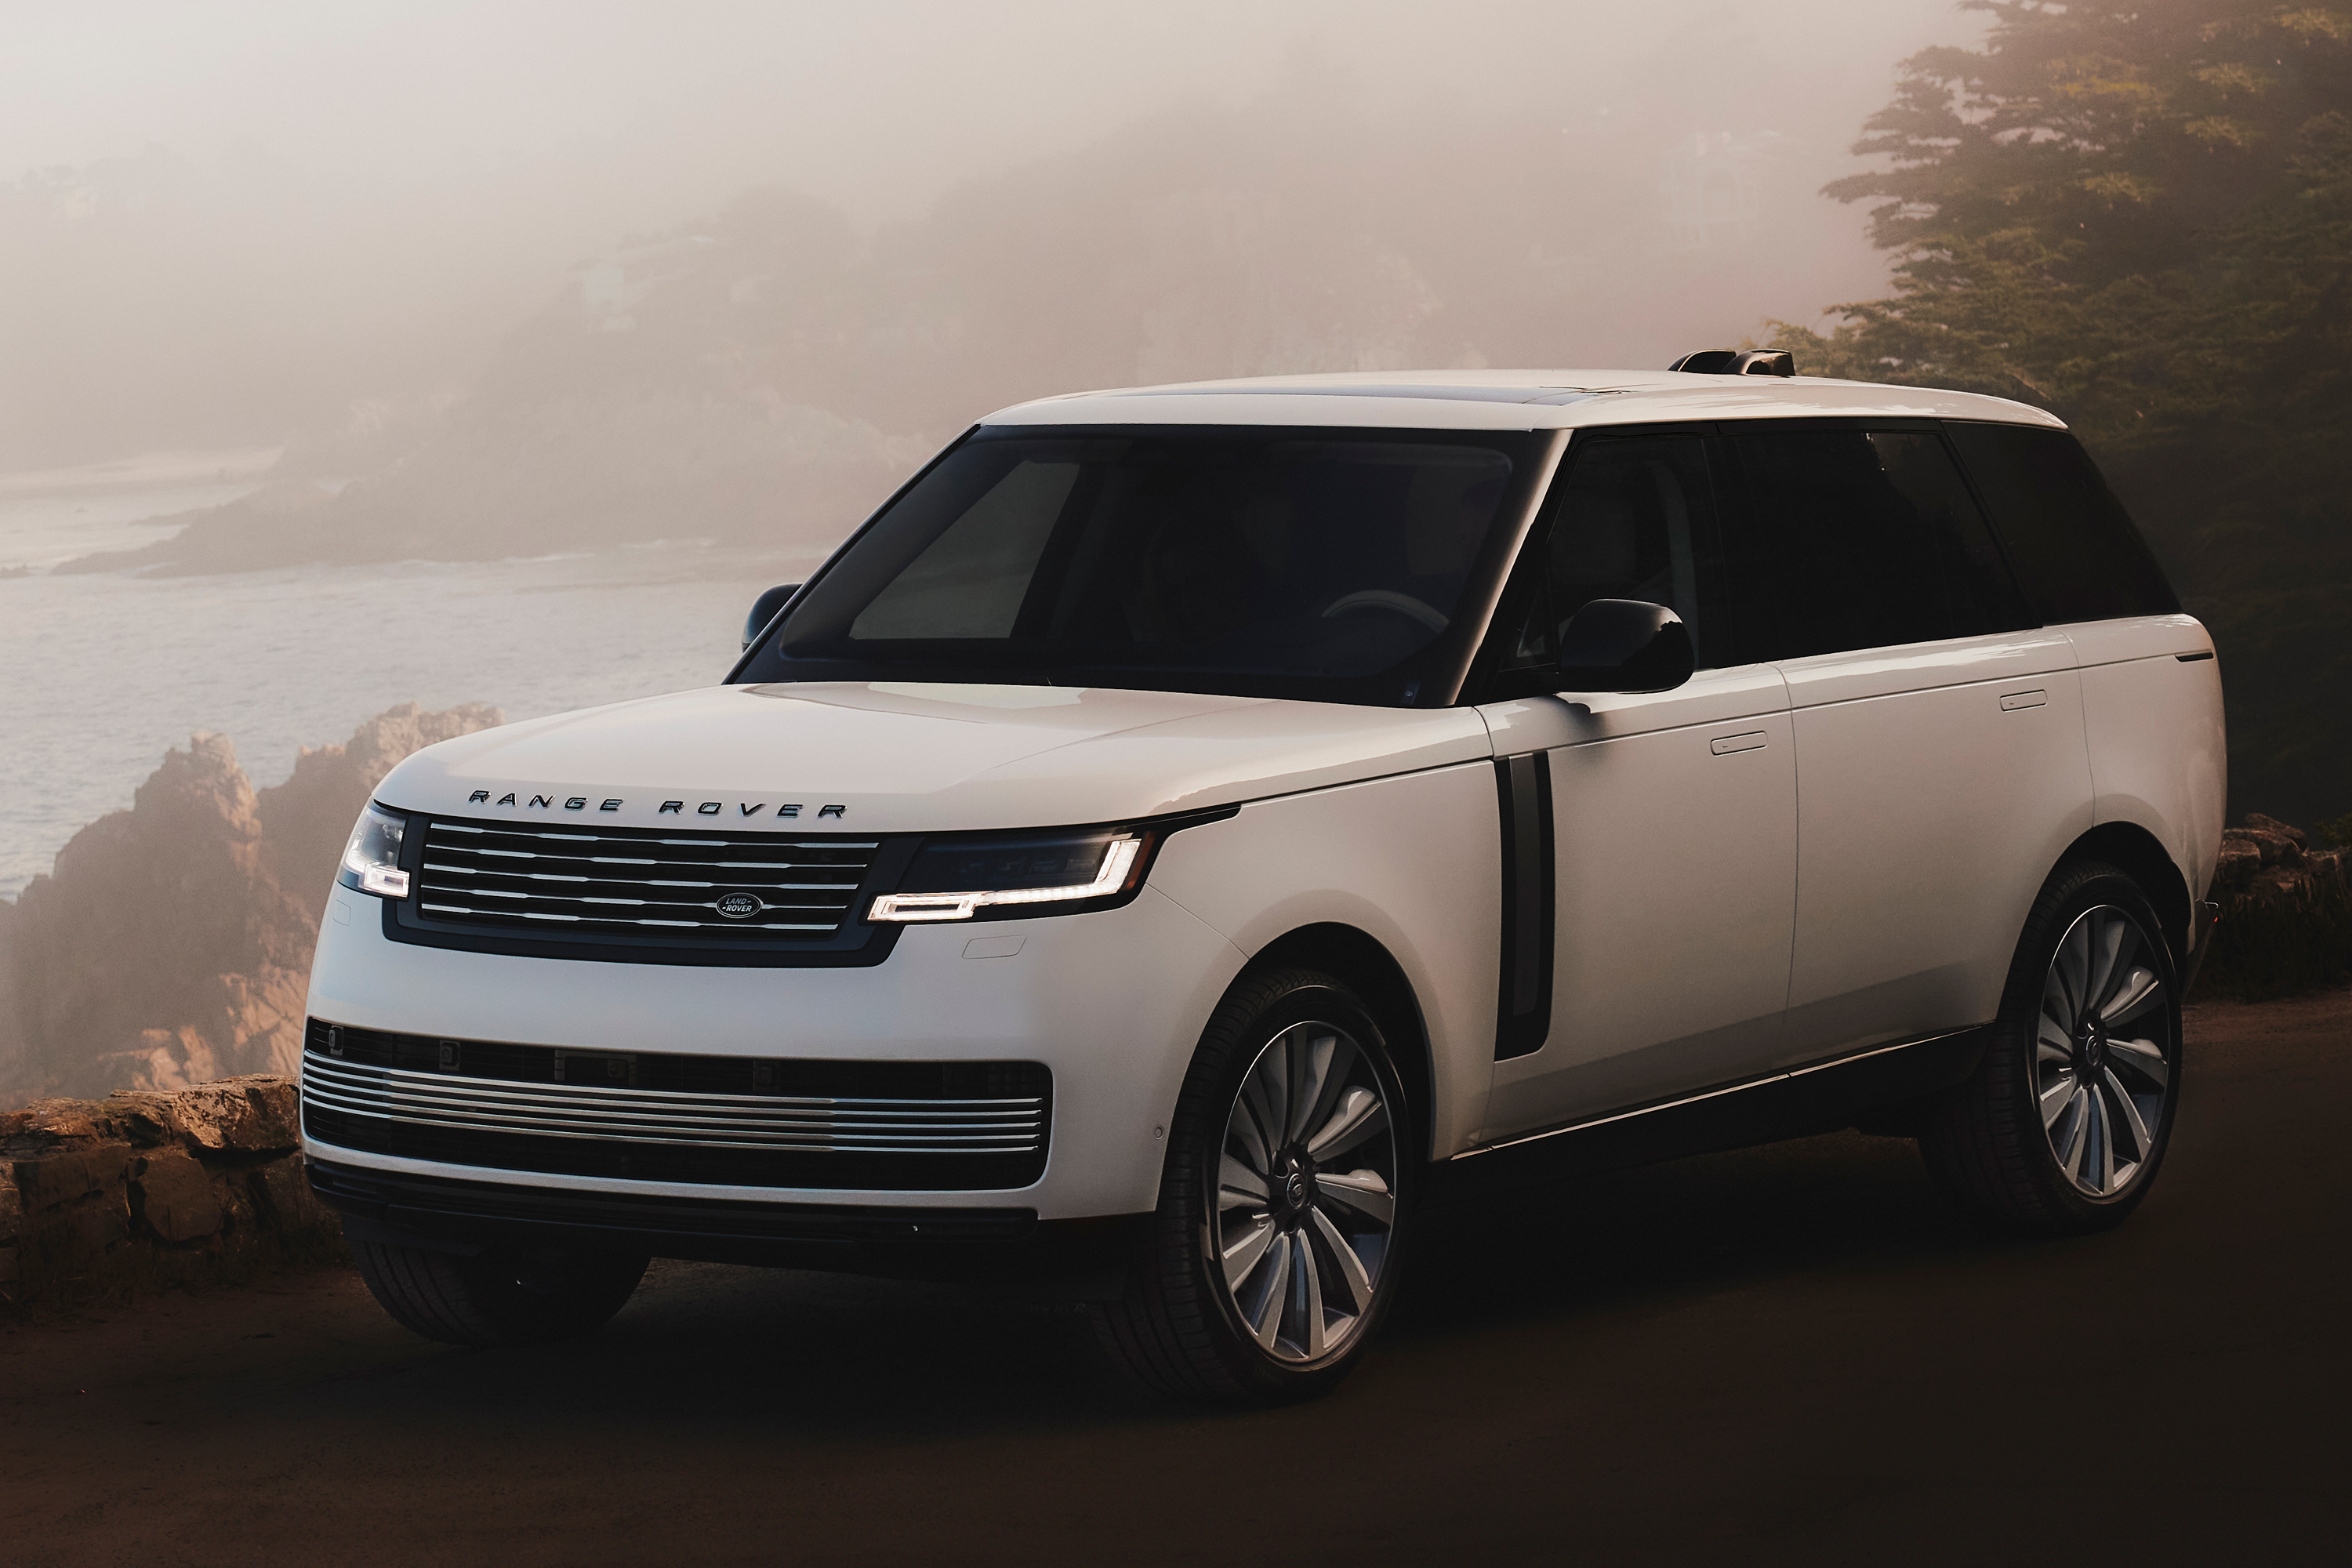 Land Rover Just Revealed a $370,000 Version of Its Full-Size SUV